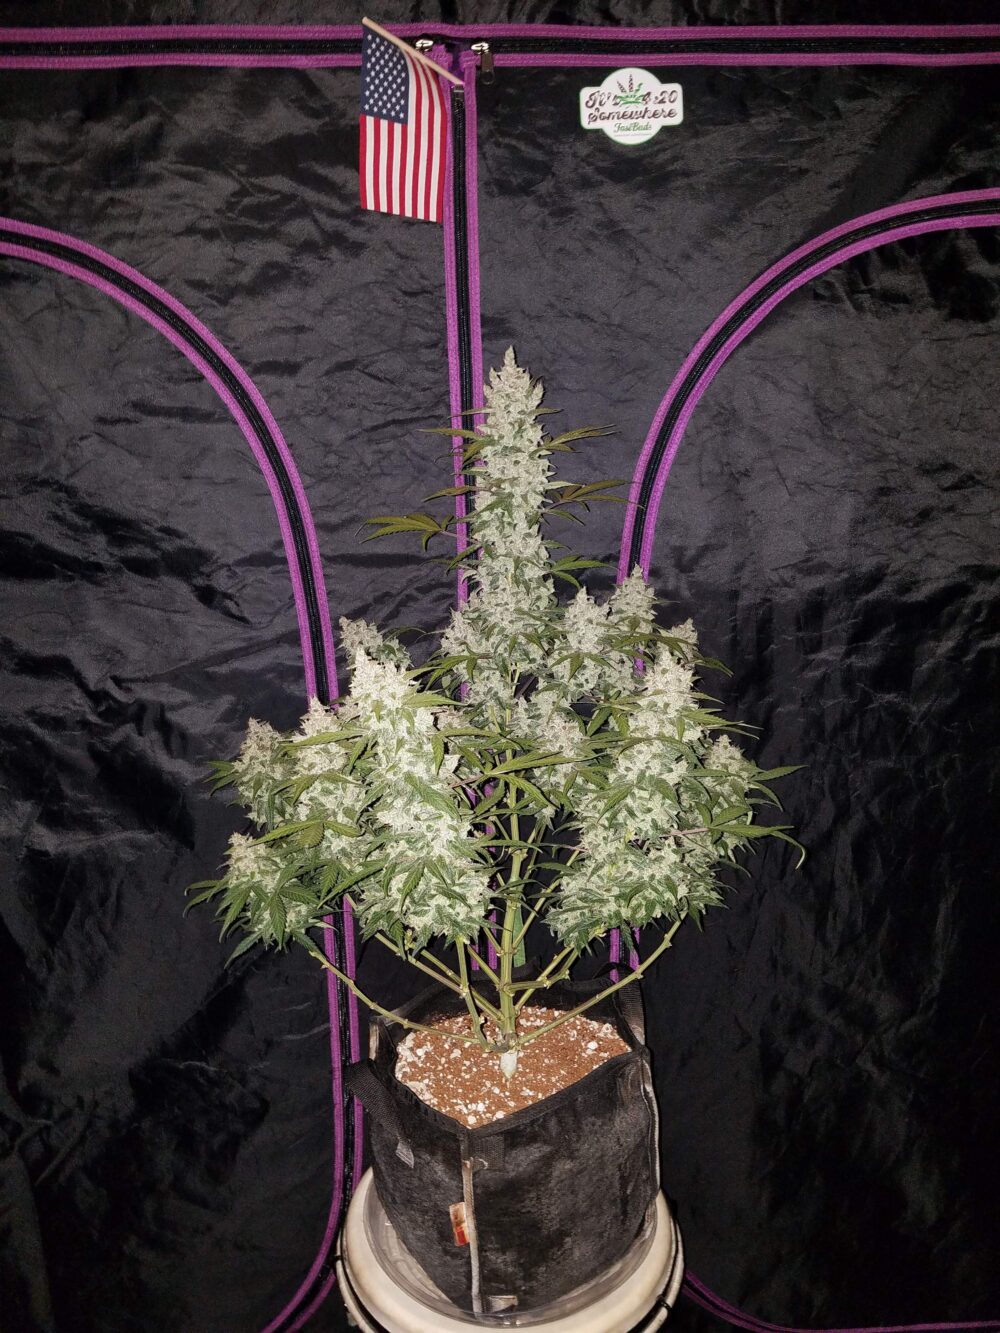 auto girl scout cookies seeds, auto seeds girl scout cookies, best girl scout cookies seeds feminized, cannabis girl scout cookies seeds, cannabis strain girl scout cookies, cookie seed, cookies seeds, euro girl scout, fast buds girl scout cookies autoflowering feminised seeds, girl scout cookie, girl scout cookie strain, girl scout cookie weed, Girl Scout Cookies, girl scout cookies auto, girl scout cookies deutschland, girl scout cookies seed, girl scout cookies seeds, Girl Scout Cookies Strain, girl scout cookies wirkung, girl scout seeds, girls scout cookies, girlscout cookies, Girlscout cookies strain